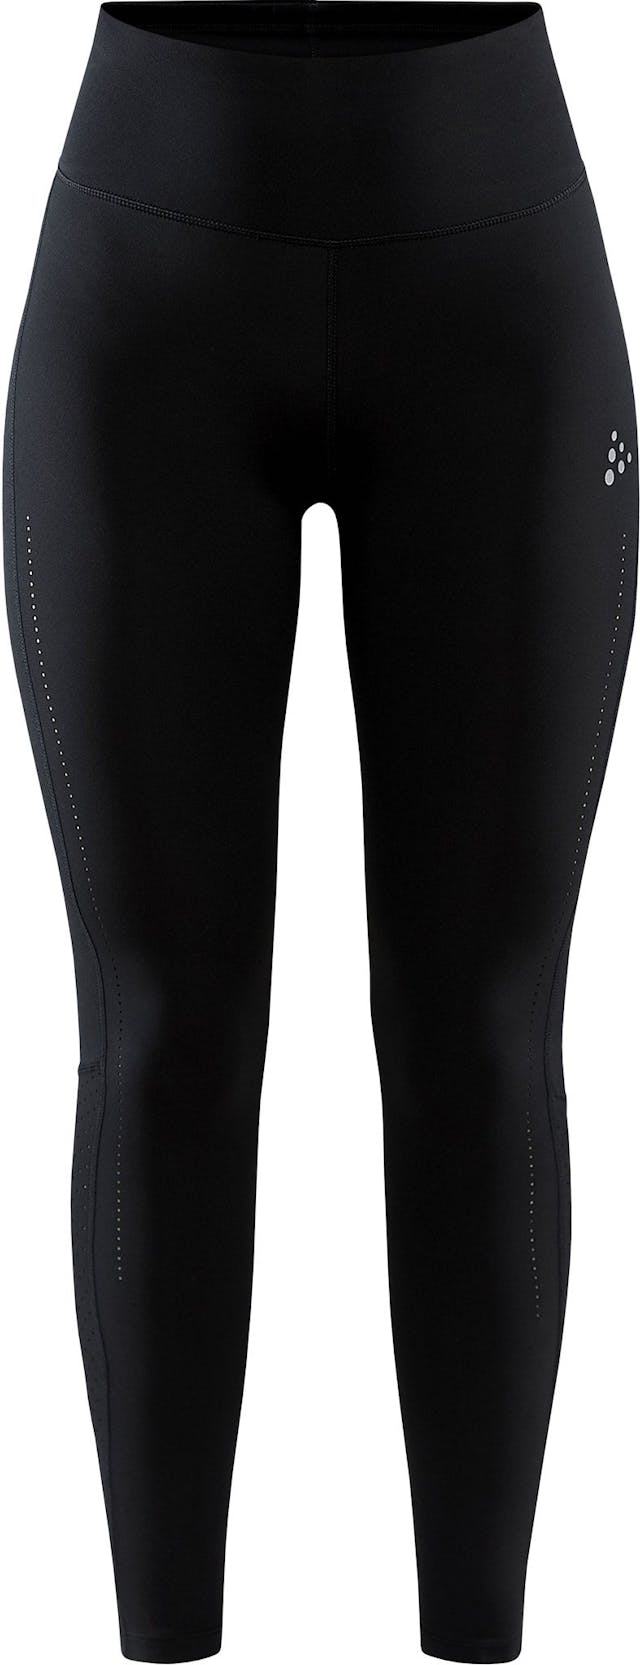 Product image for ADV Essence Perforated Tights - Women's